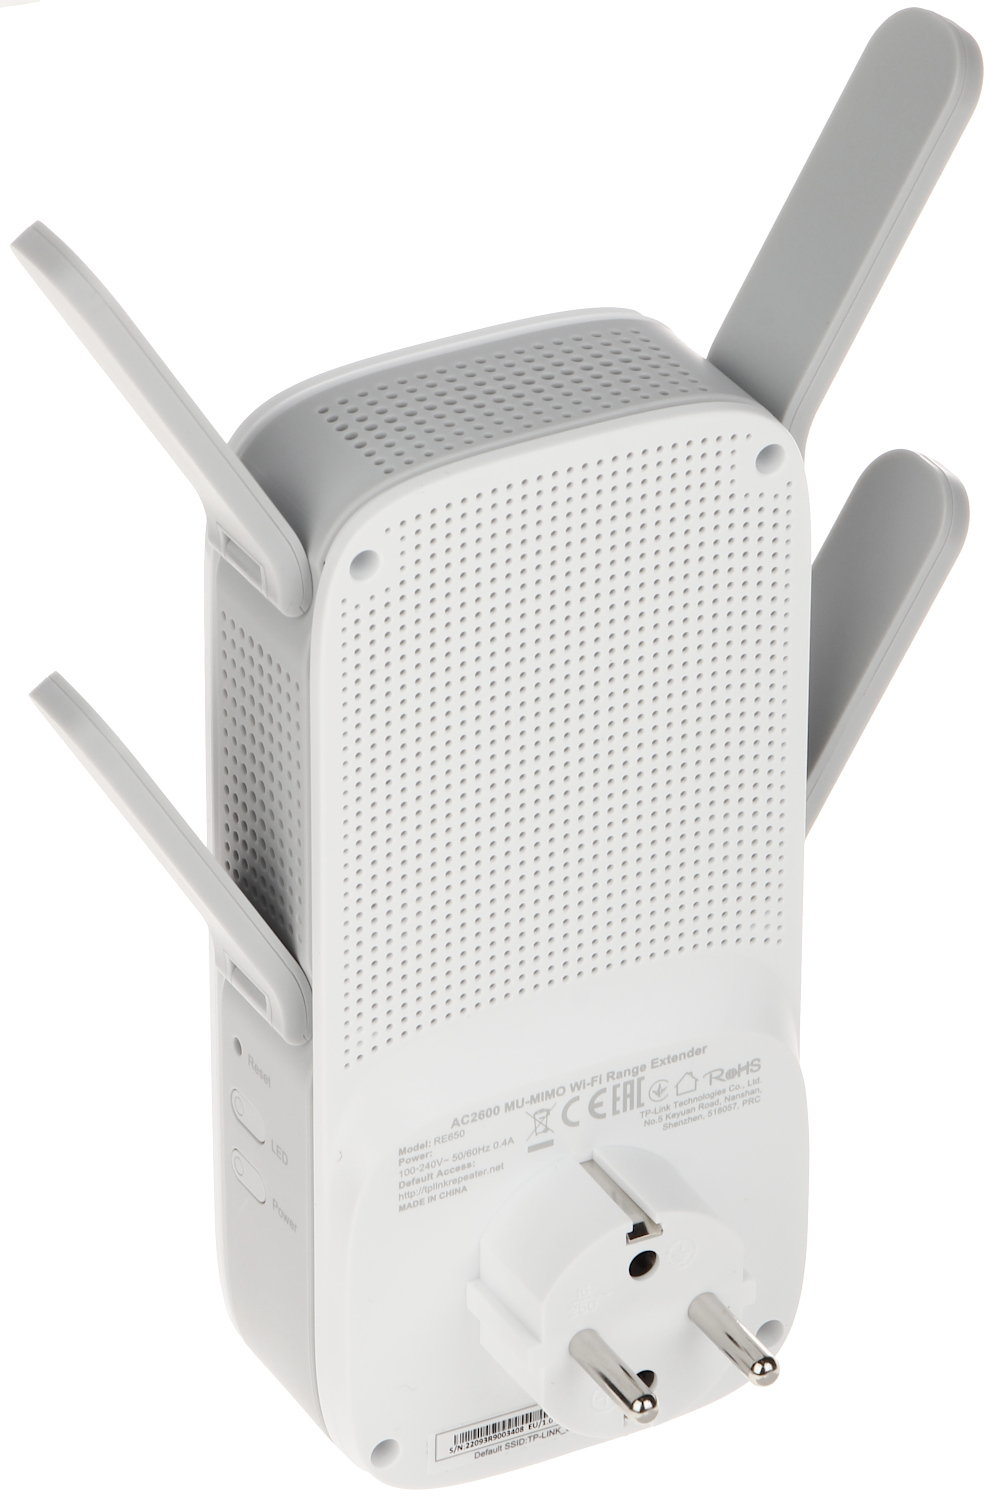 UNIVERSAL WI-FI RANGE EXTENDER TL-RE650 2.4 GHz, 5 GHz... - Other Devices -  Delta